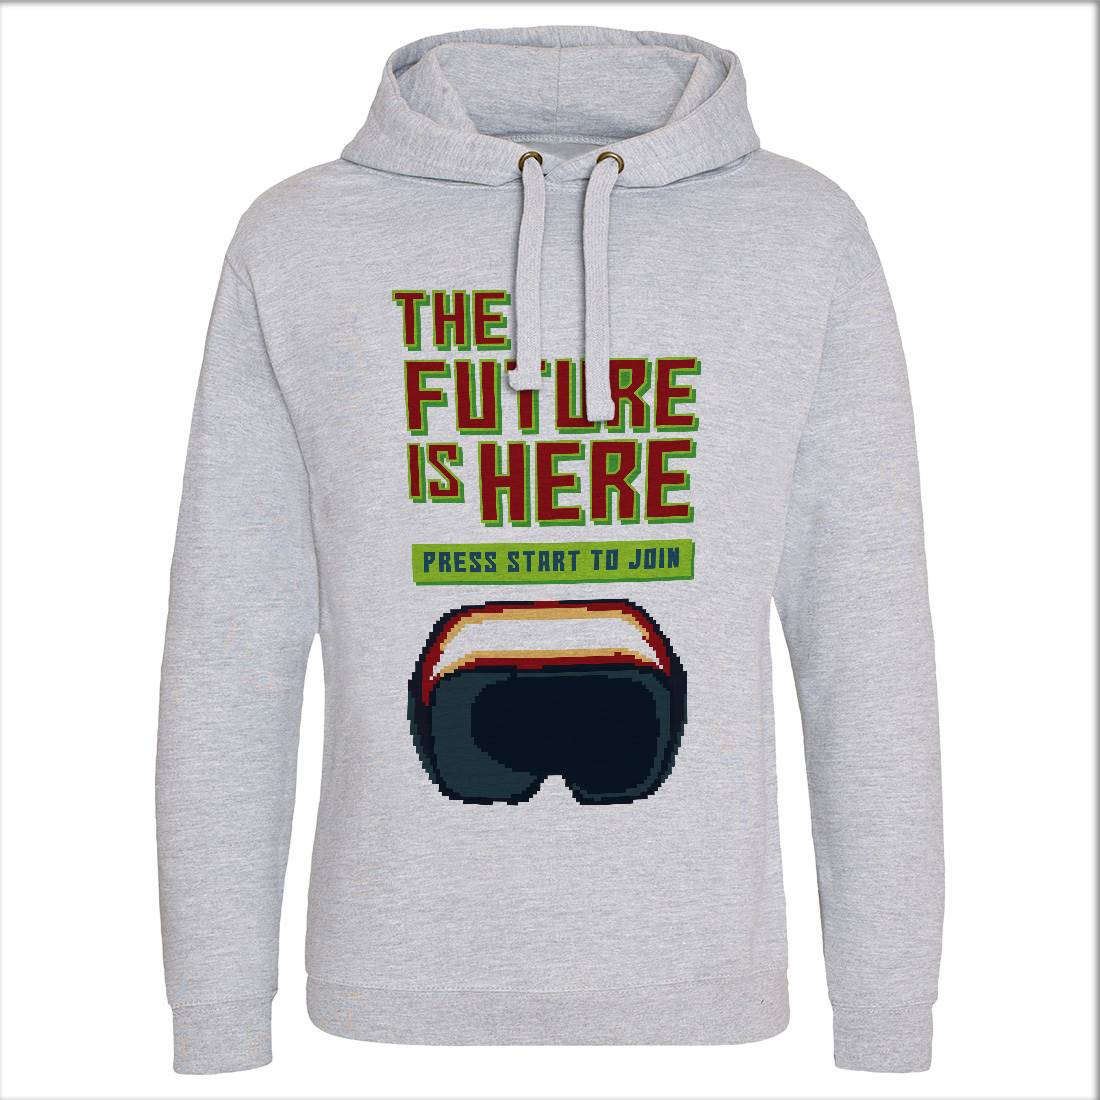 The Future Is Here Mens Hoodie Without Pocket Geek B967